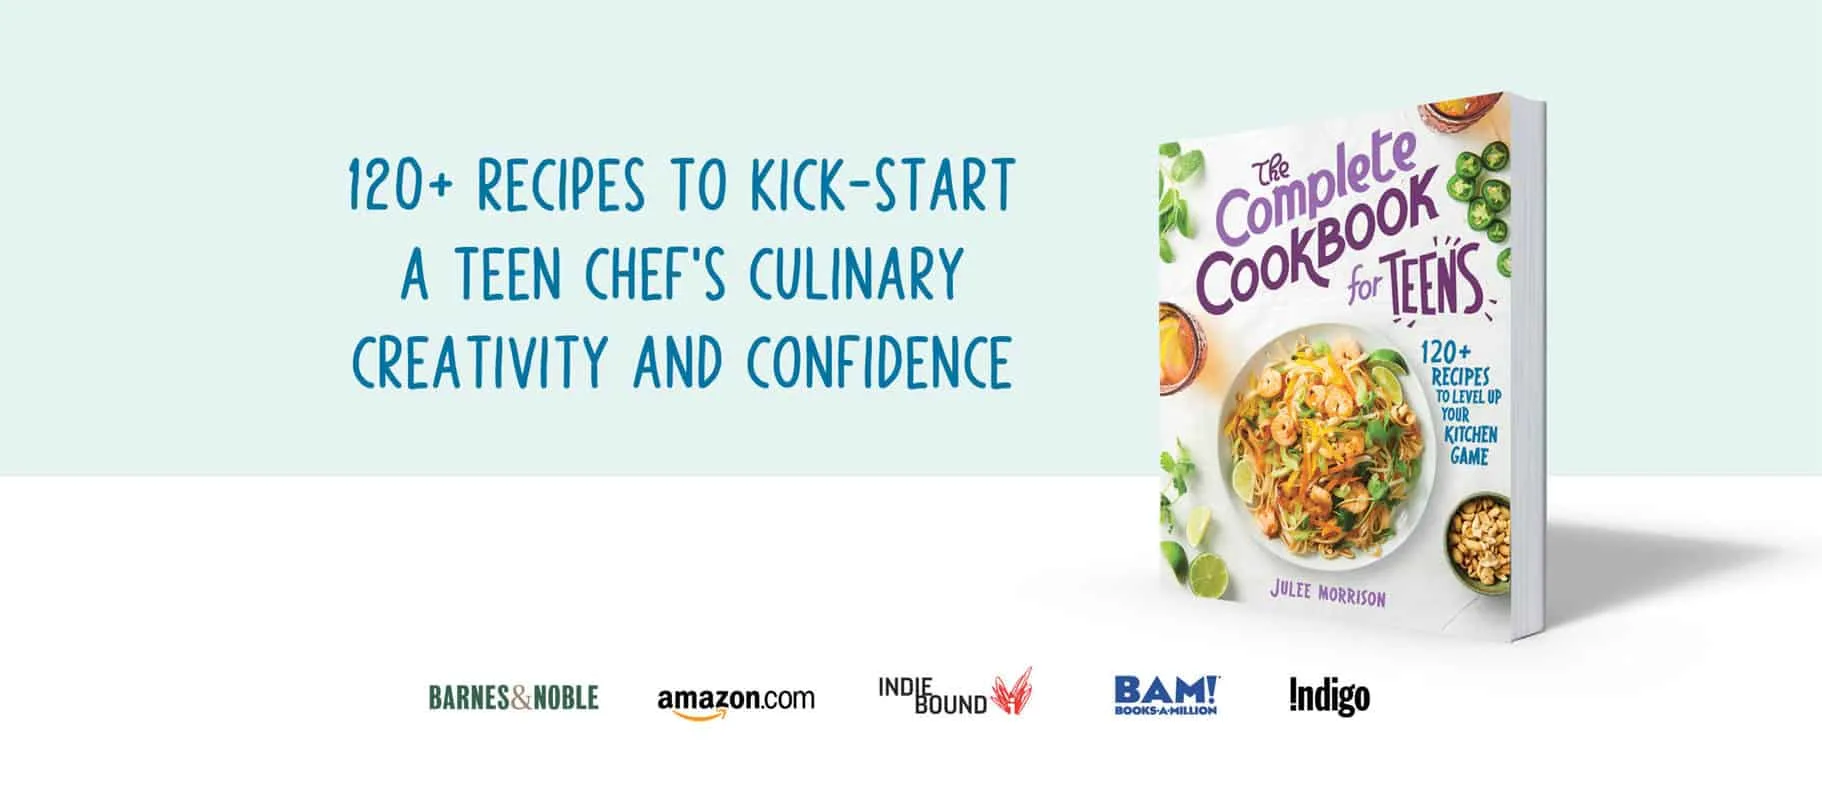 the complete cookbook for teens banner